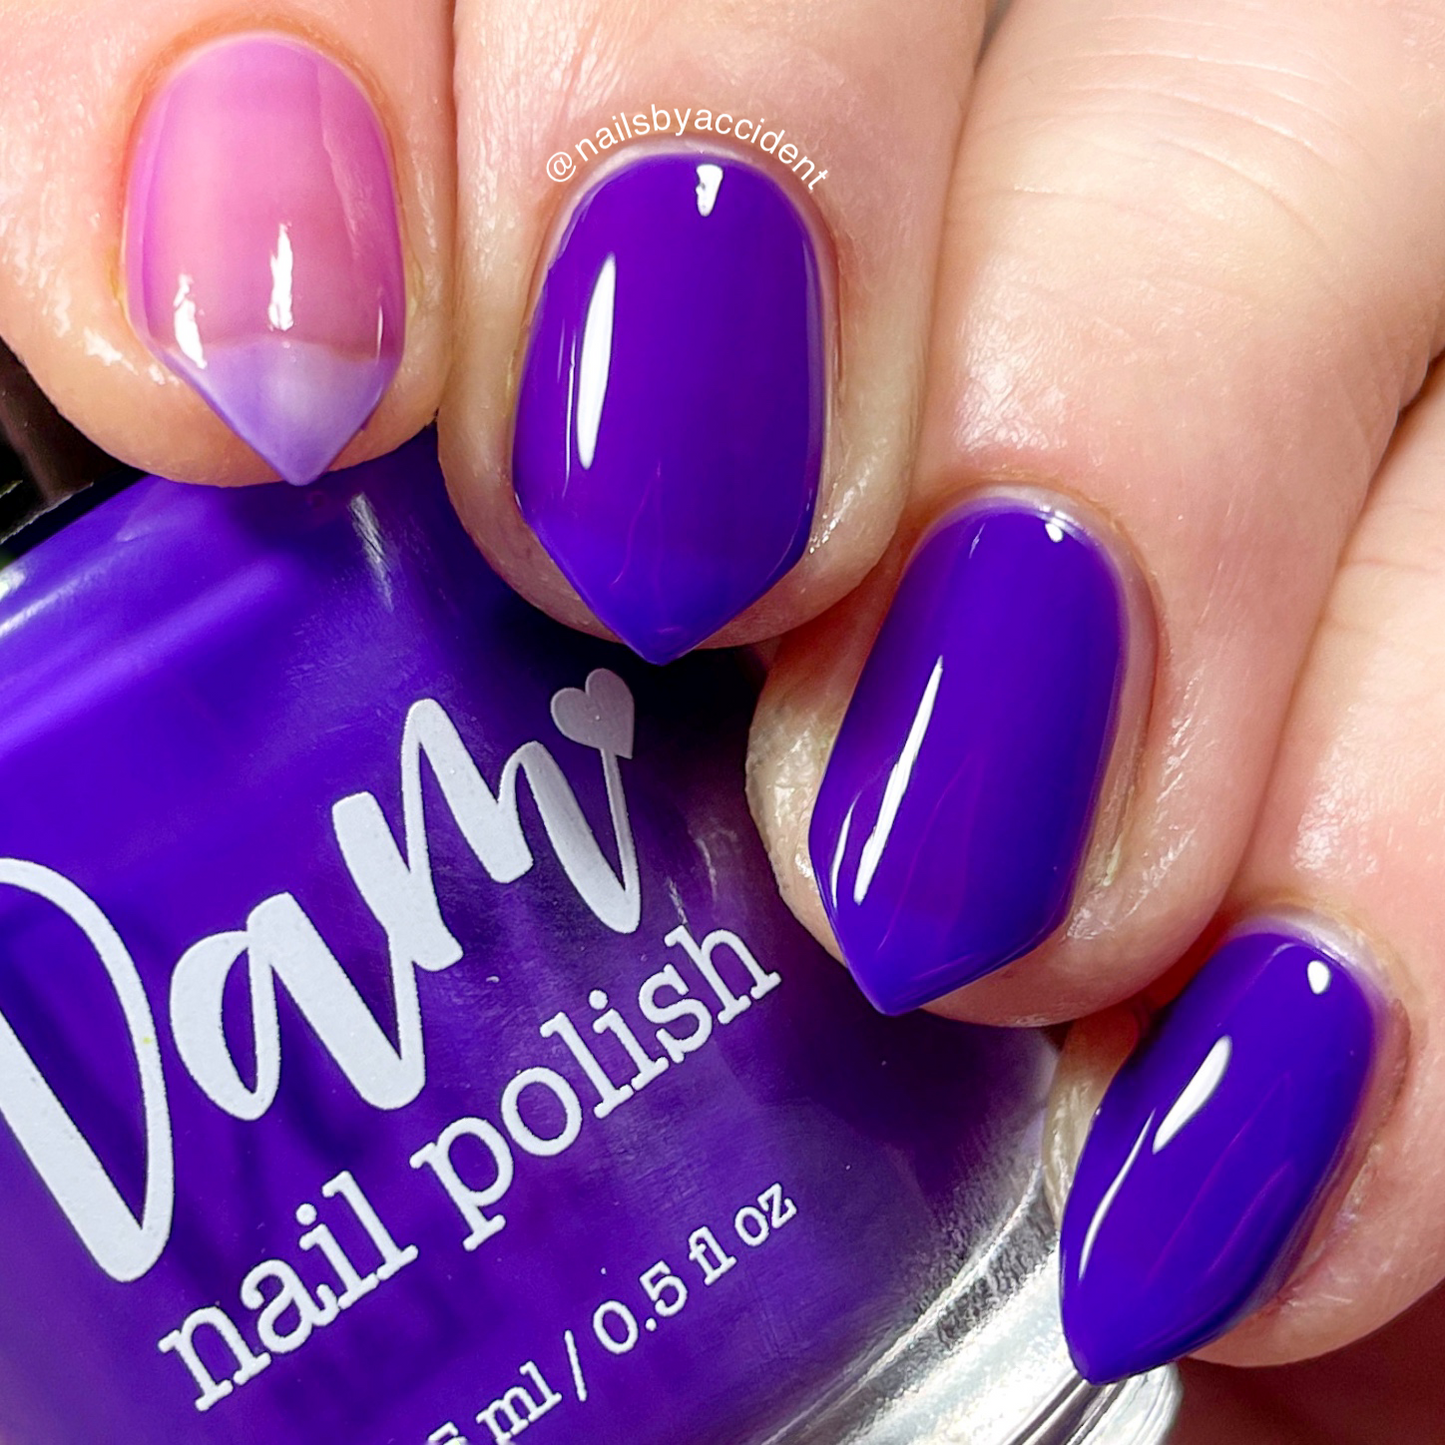 Vanishing Violet - Thermal Nail Polish - Clearly Rainbows Collection - Dam